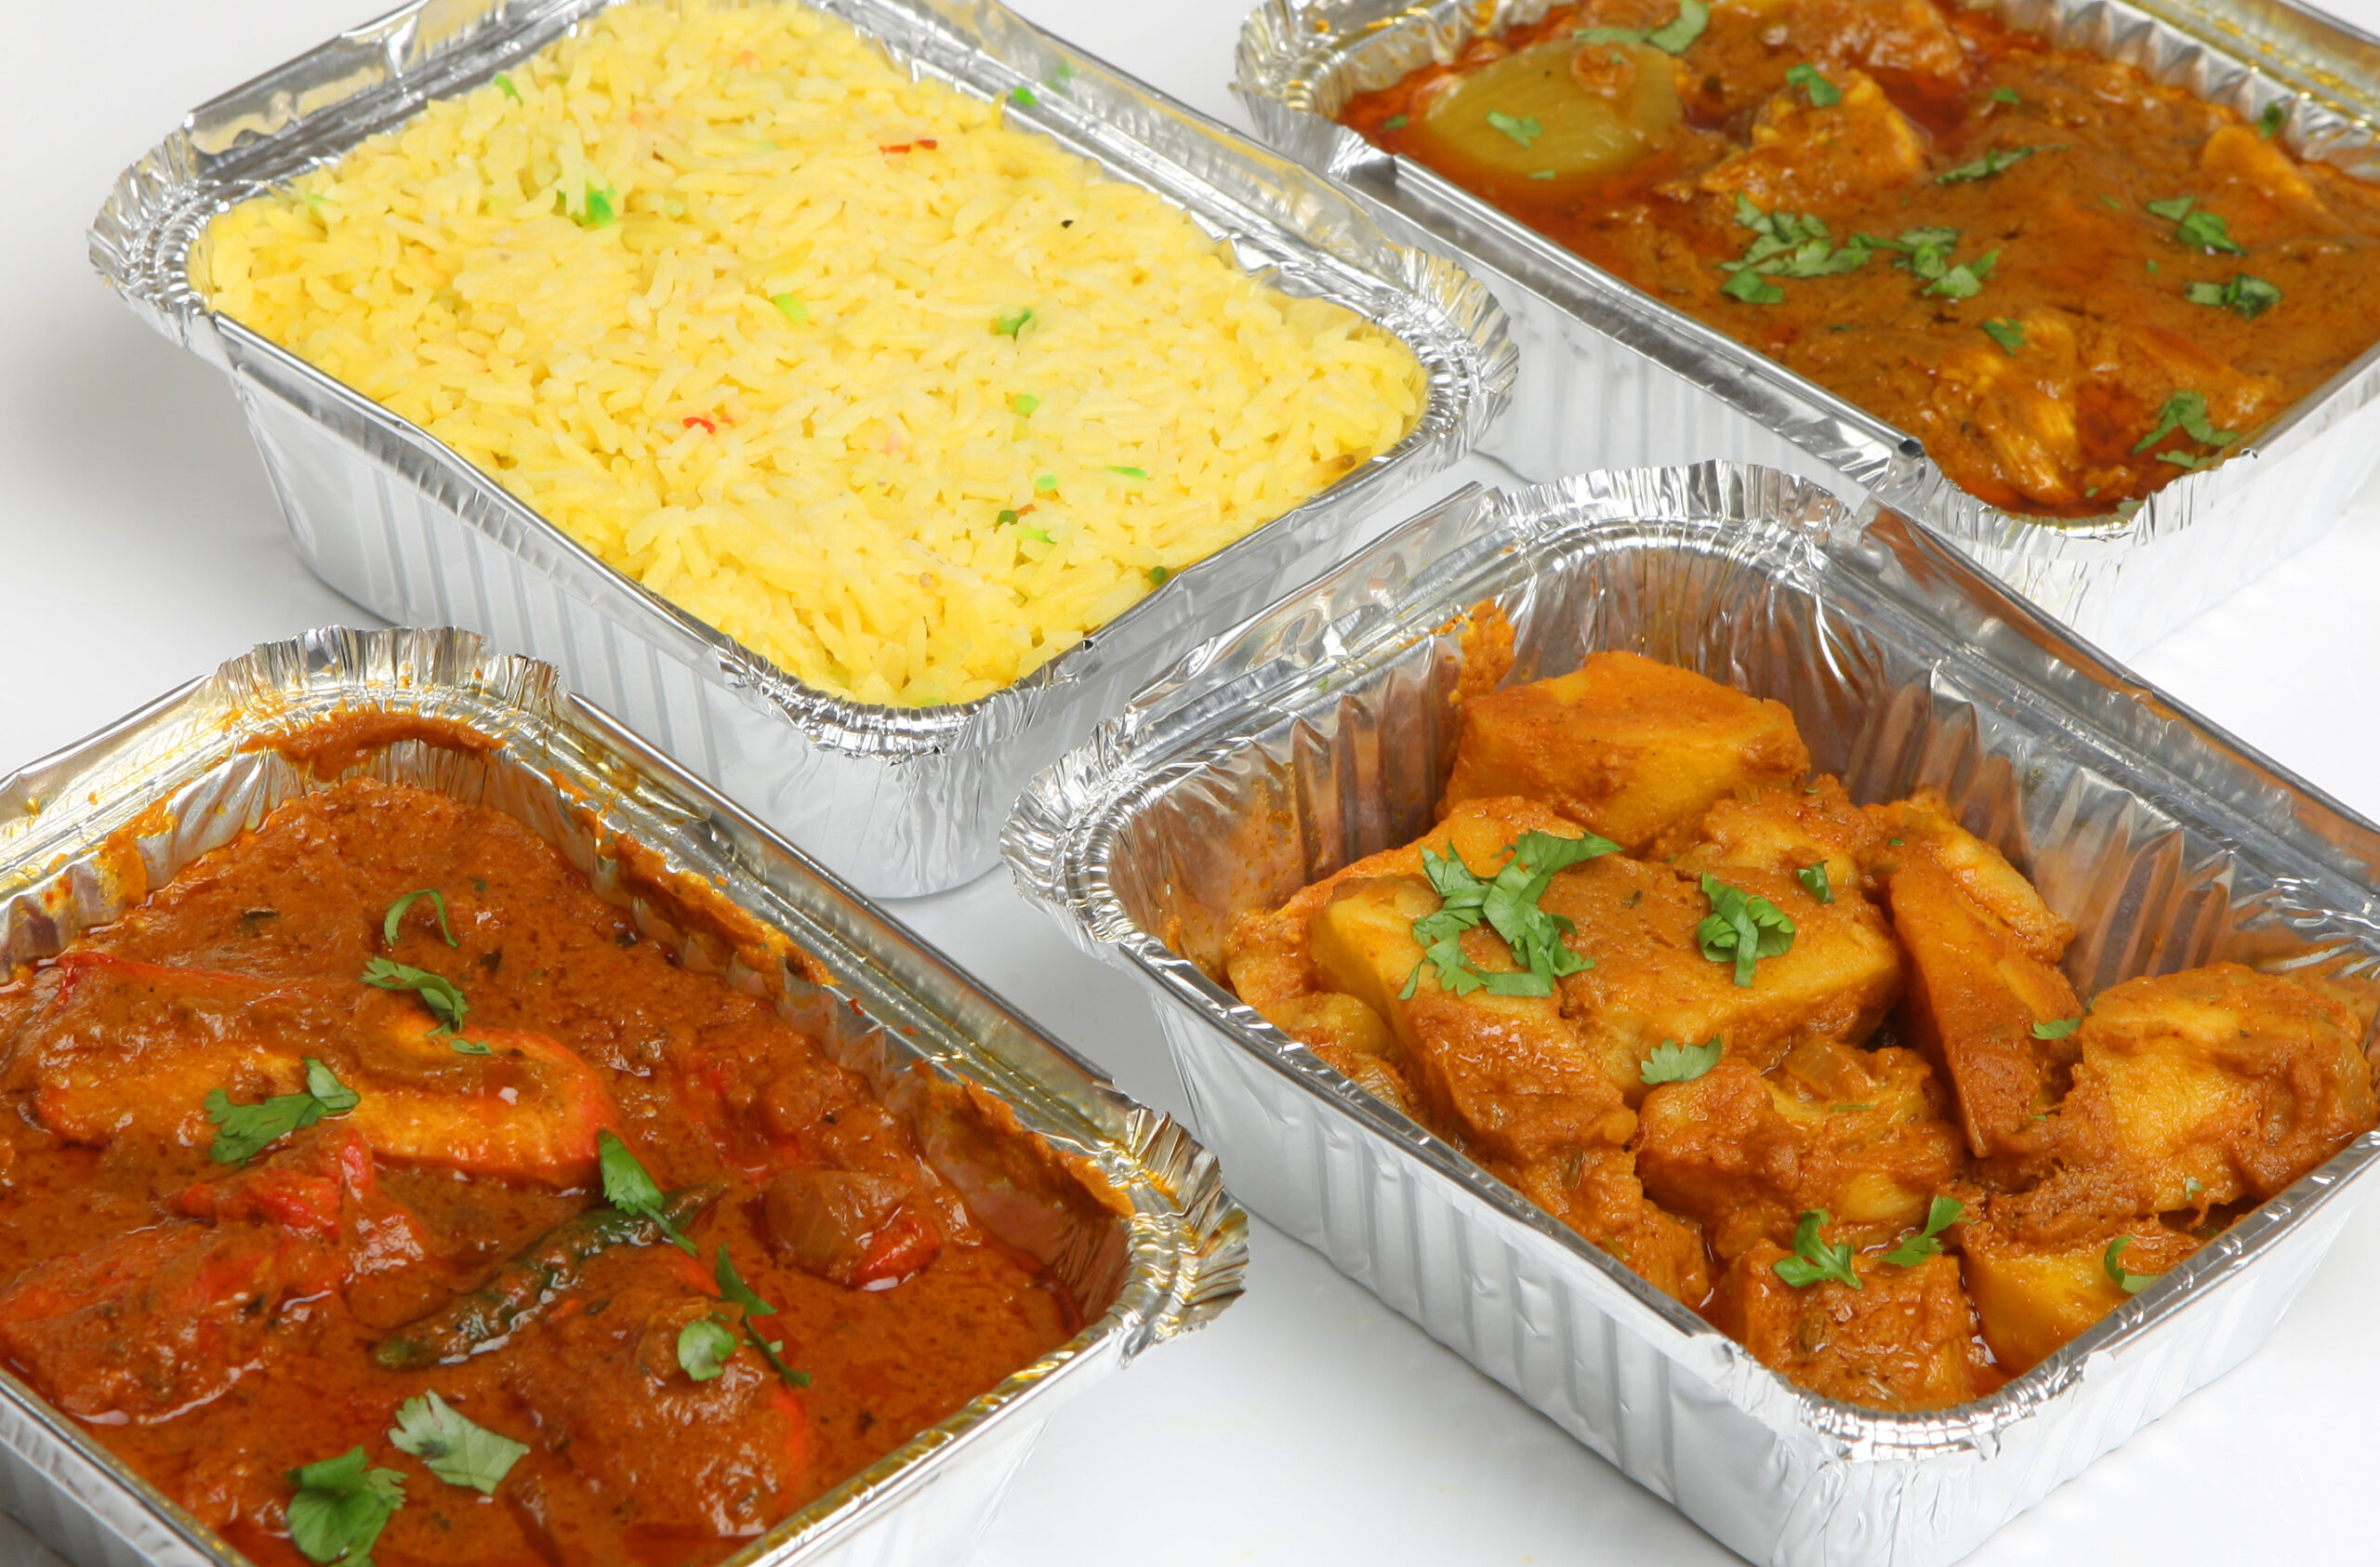 Indian takeaway food selection in foil containers.;